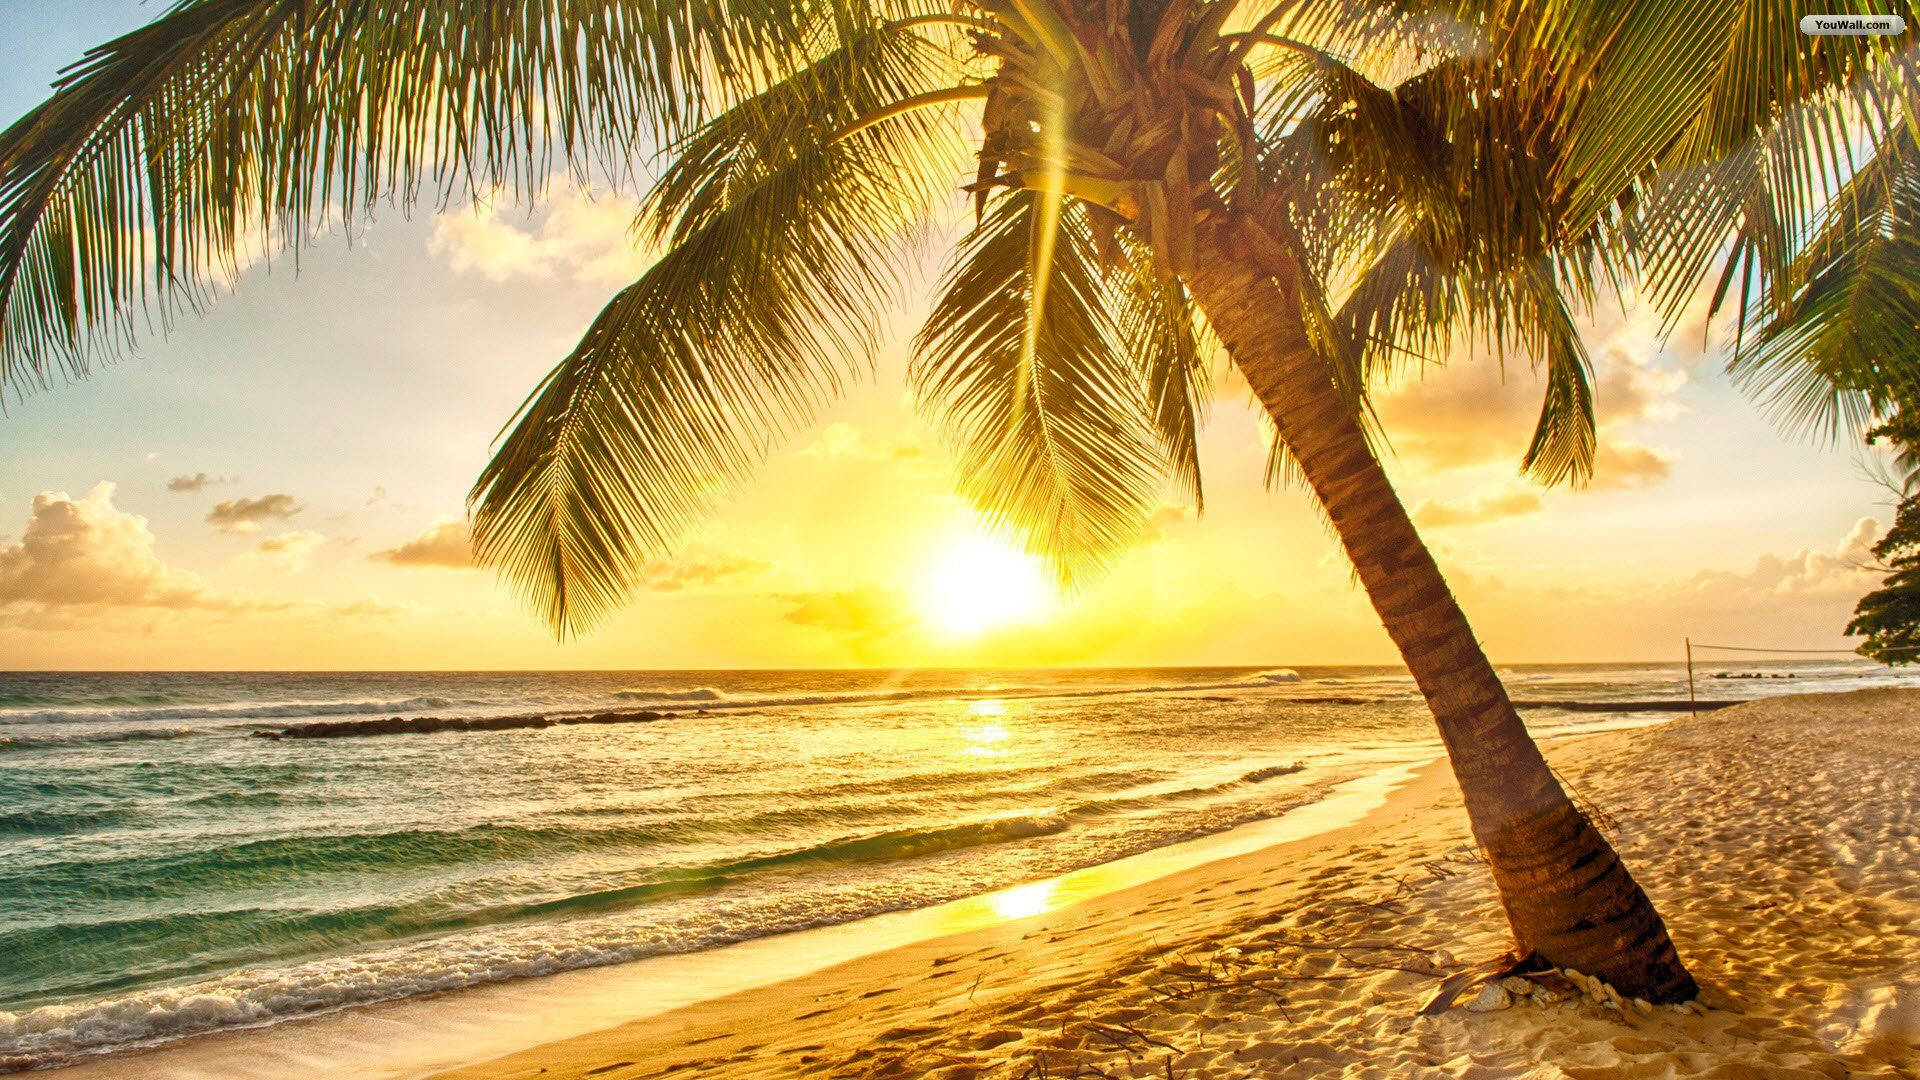 Wake up to a peaceful sunrise on a tropical beach Wallpaper